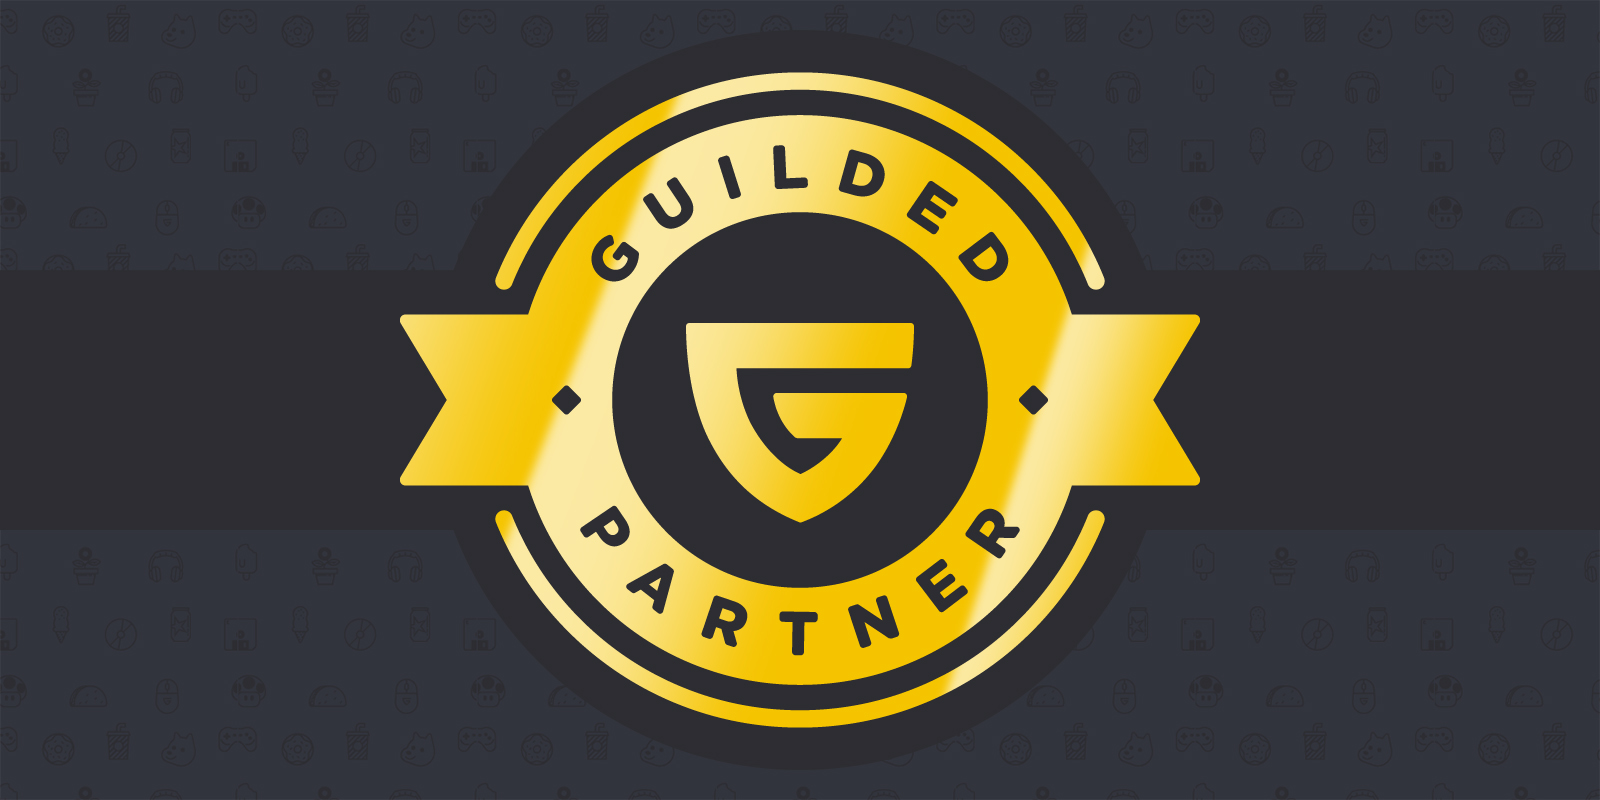 GGG Partnership: OpenBlox. Good Games Guilds continues the strike…, by  Good Games Guild